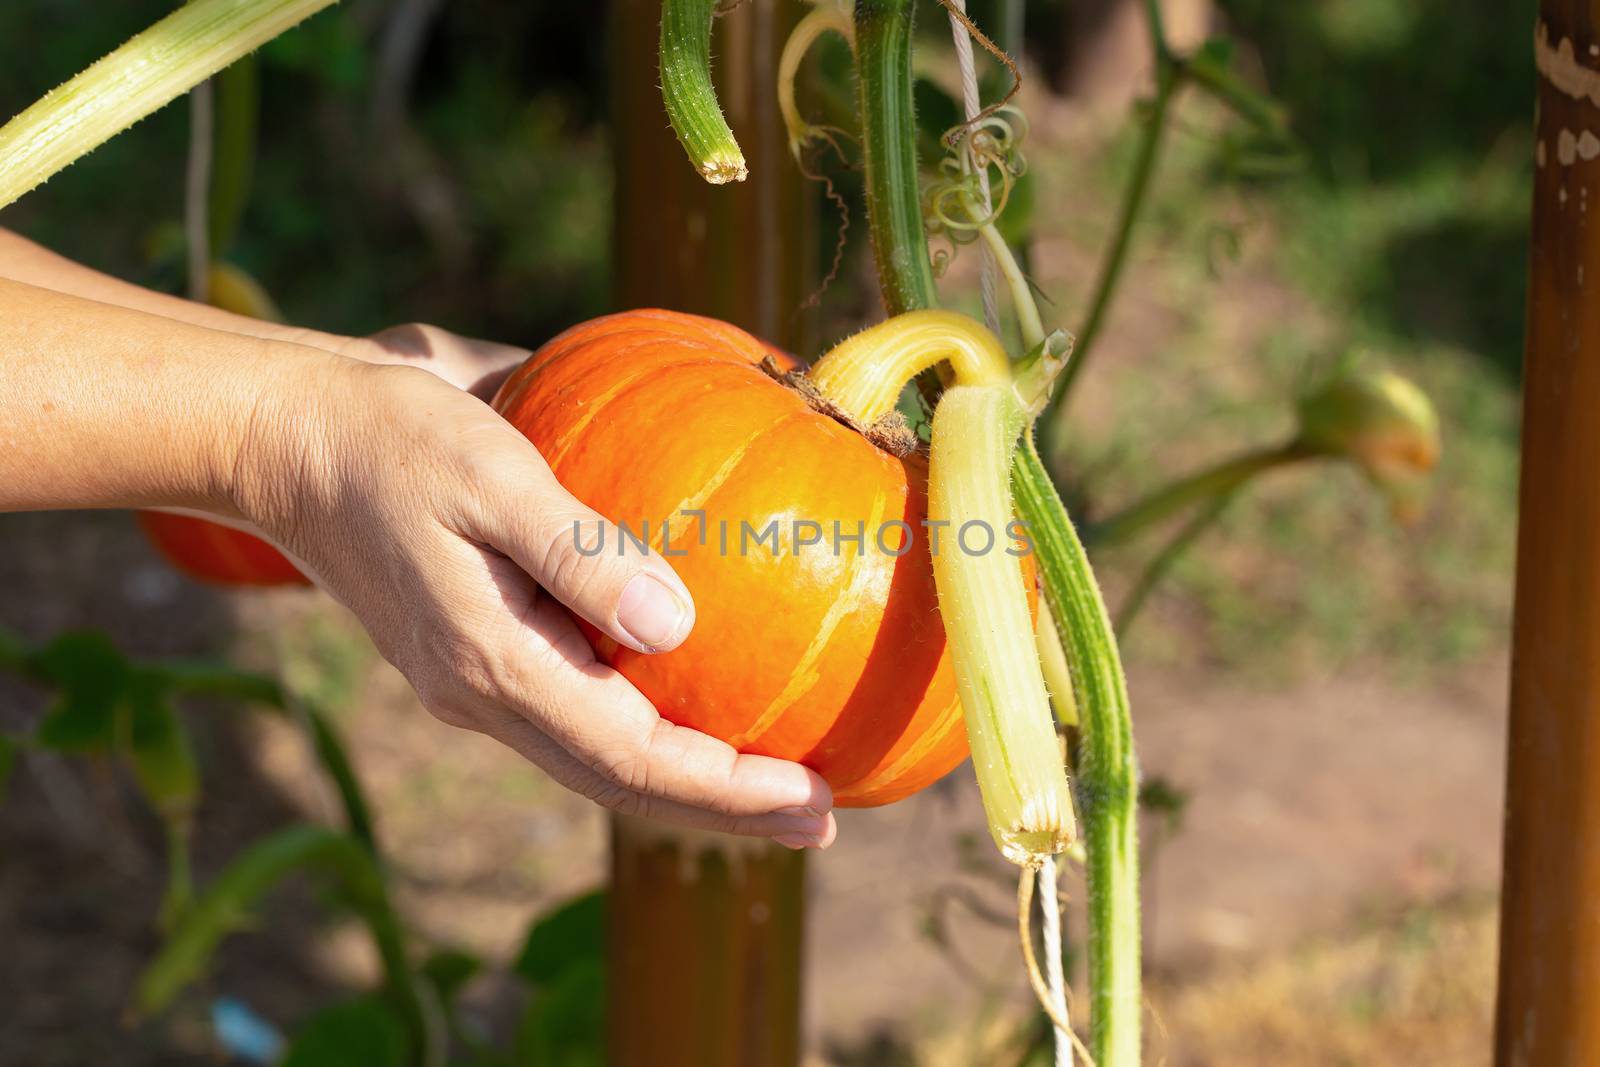 pumpkins hanging from the bamboo fence in the agricultural farm.